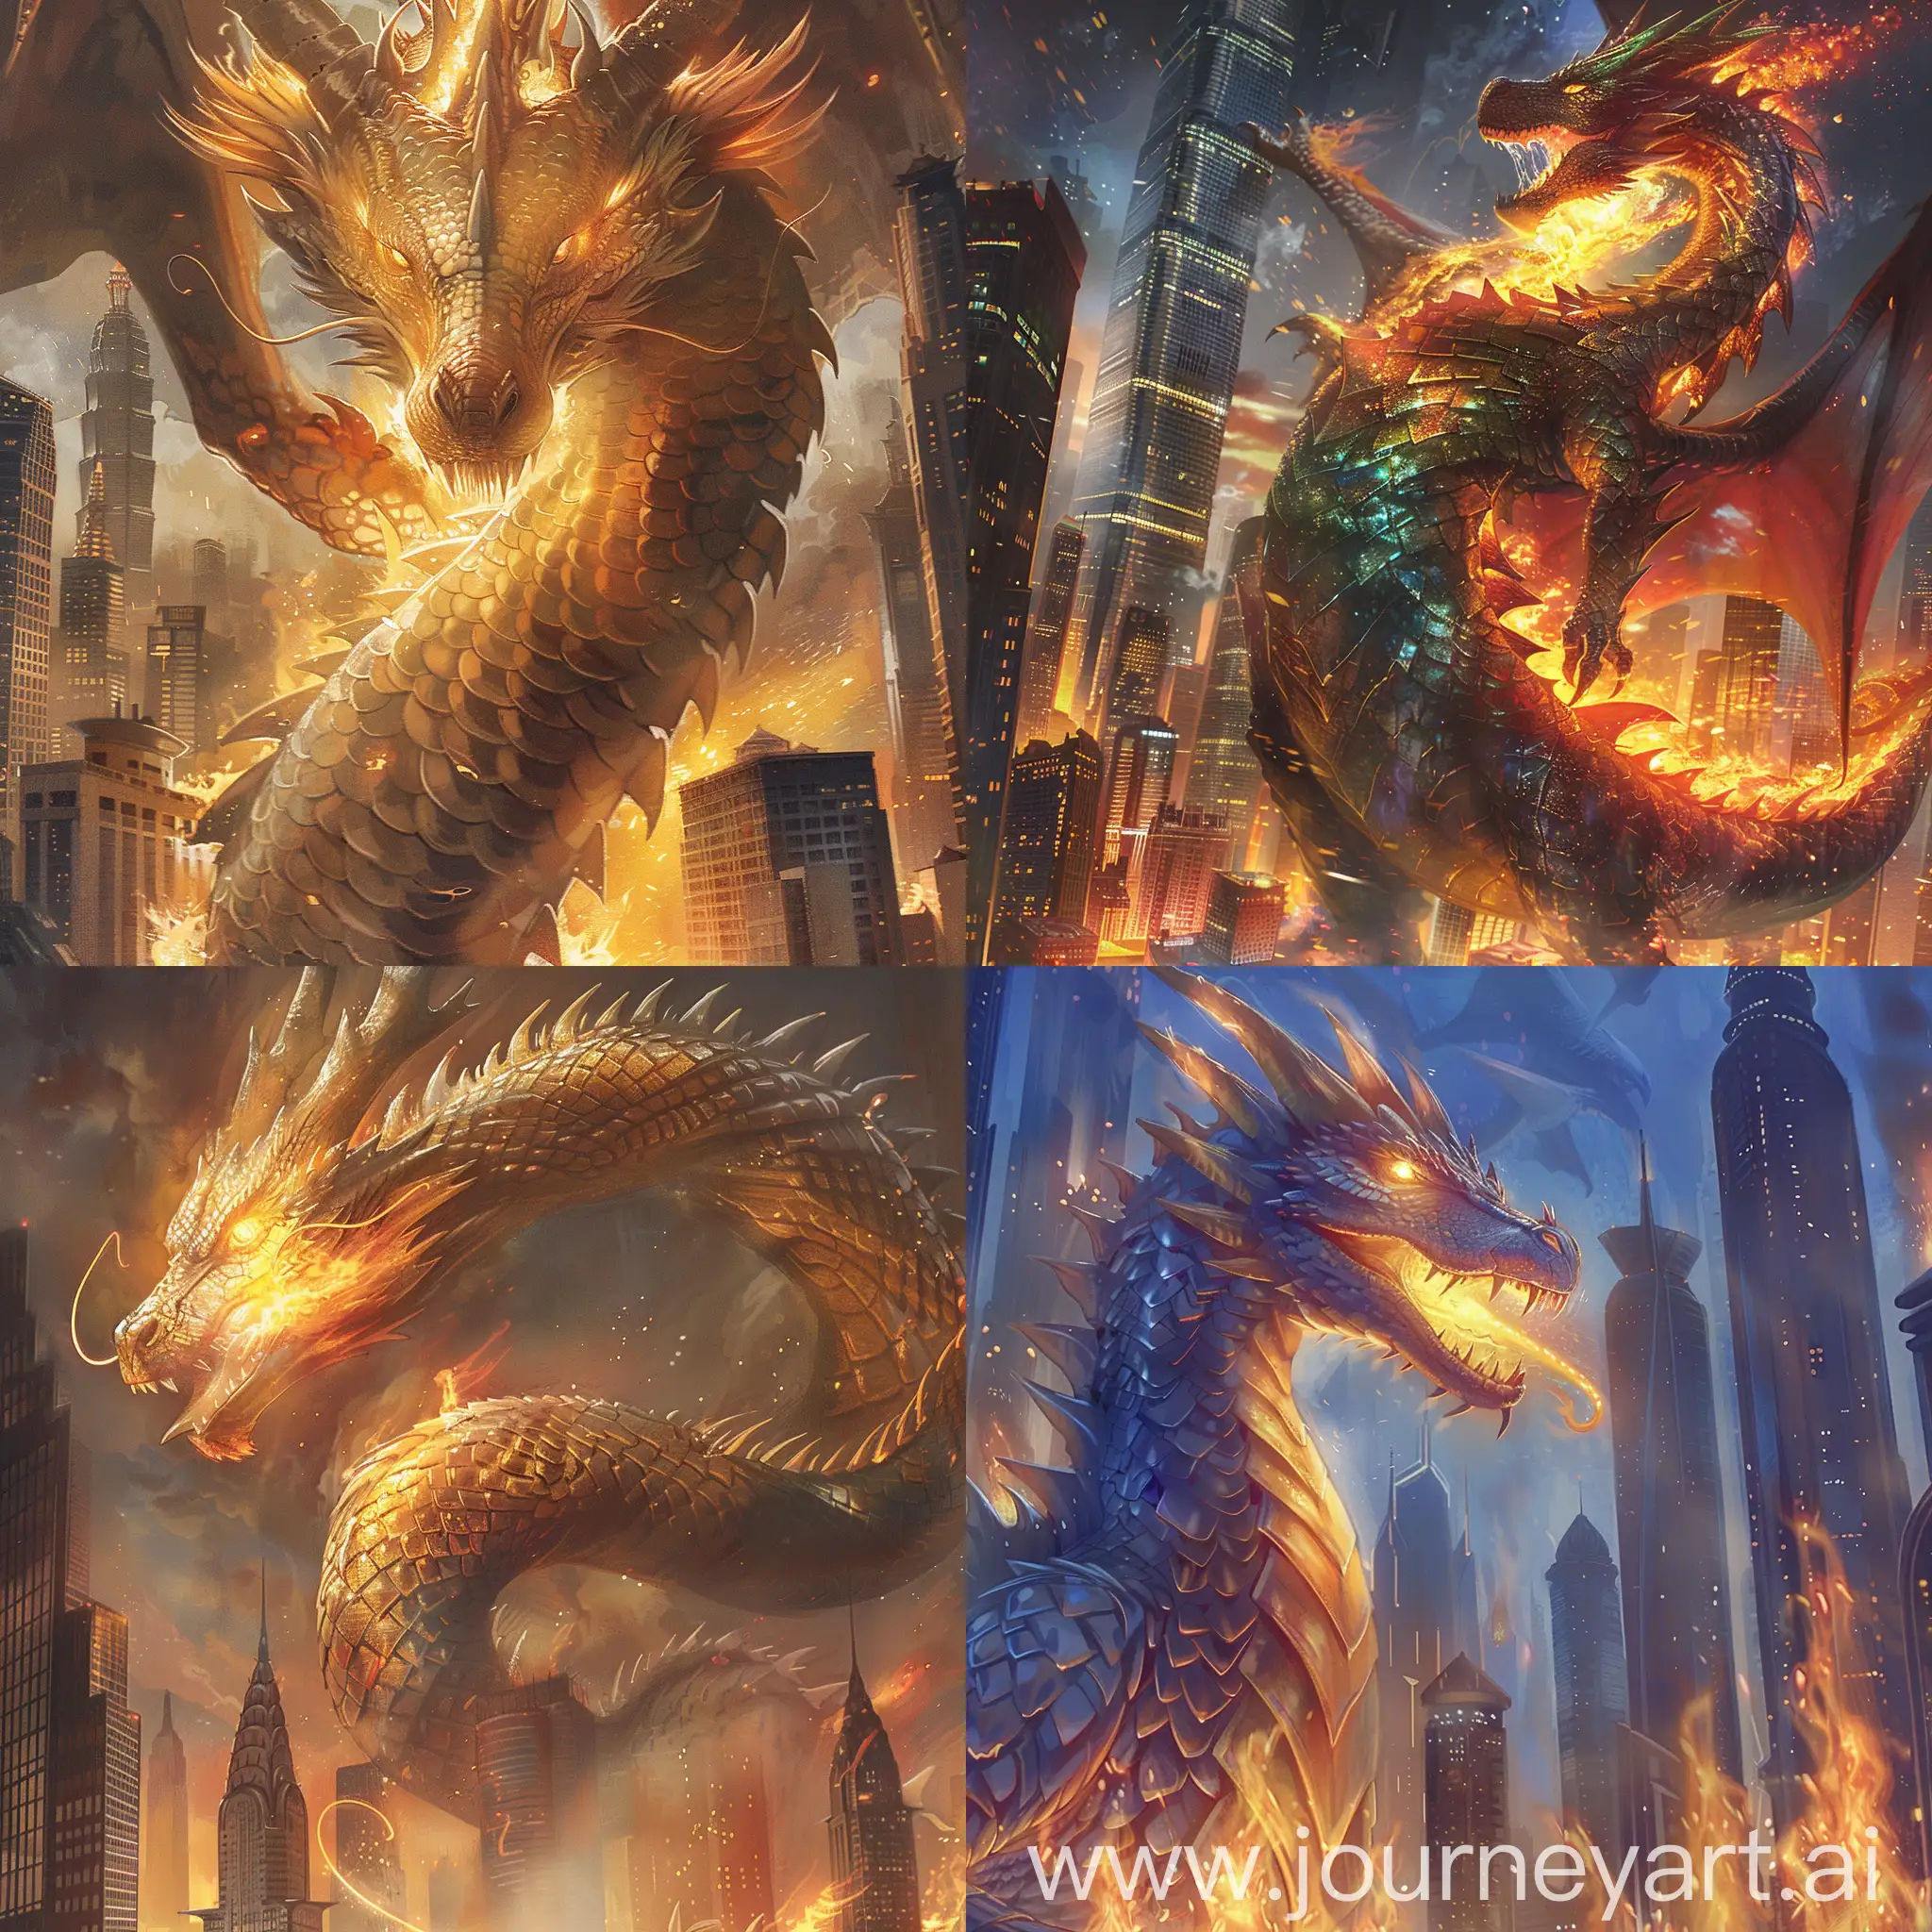 Urban-Dragon-Sculpture-Breathing-Fire-Amidst-Skyscrapers